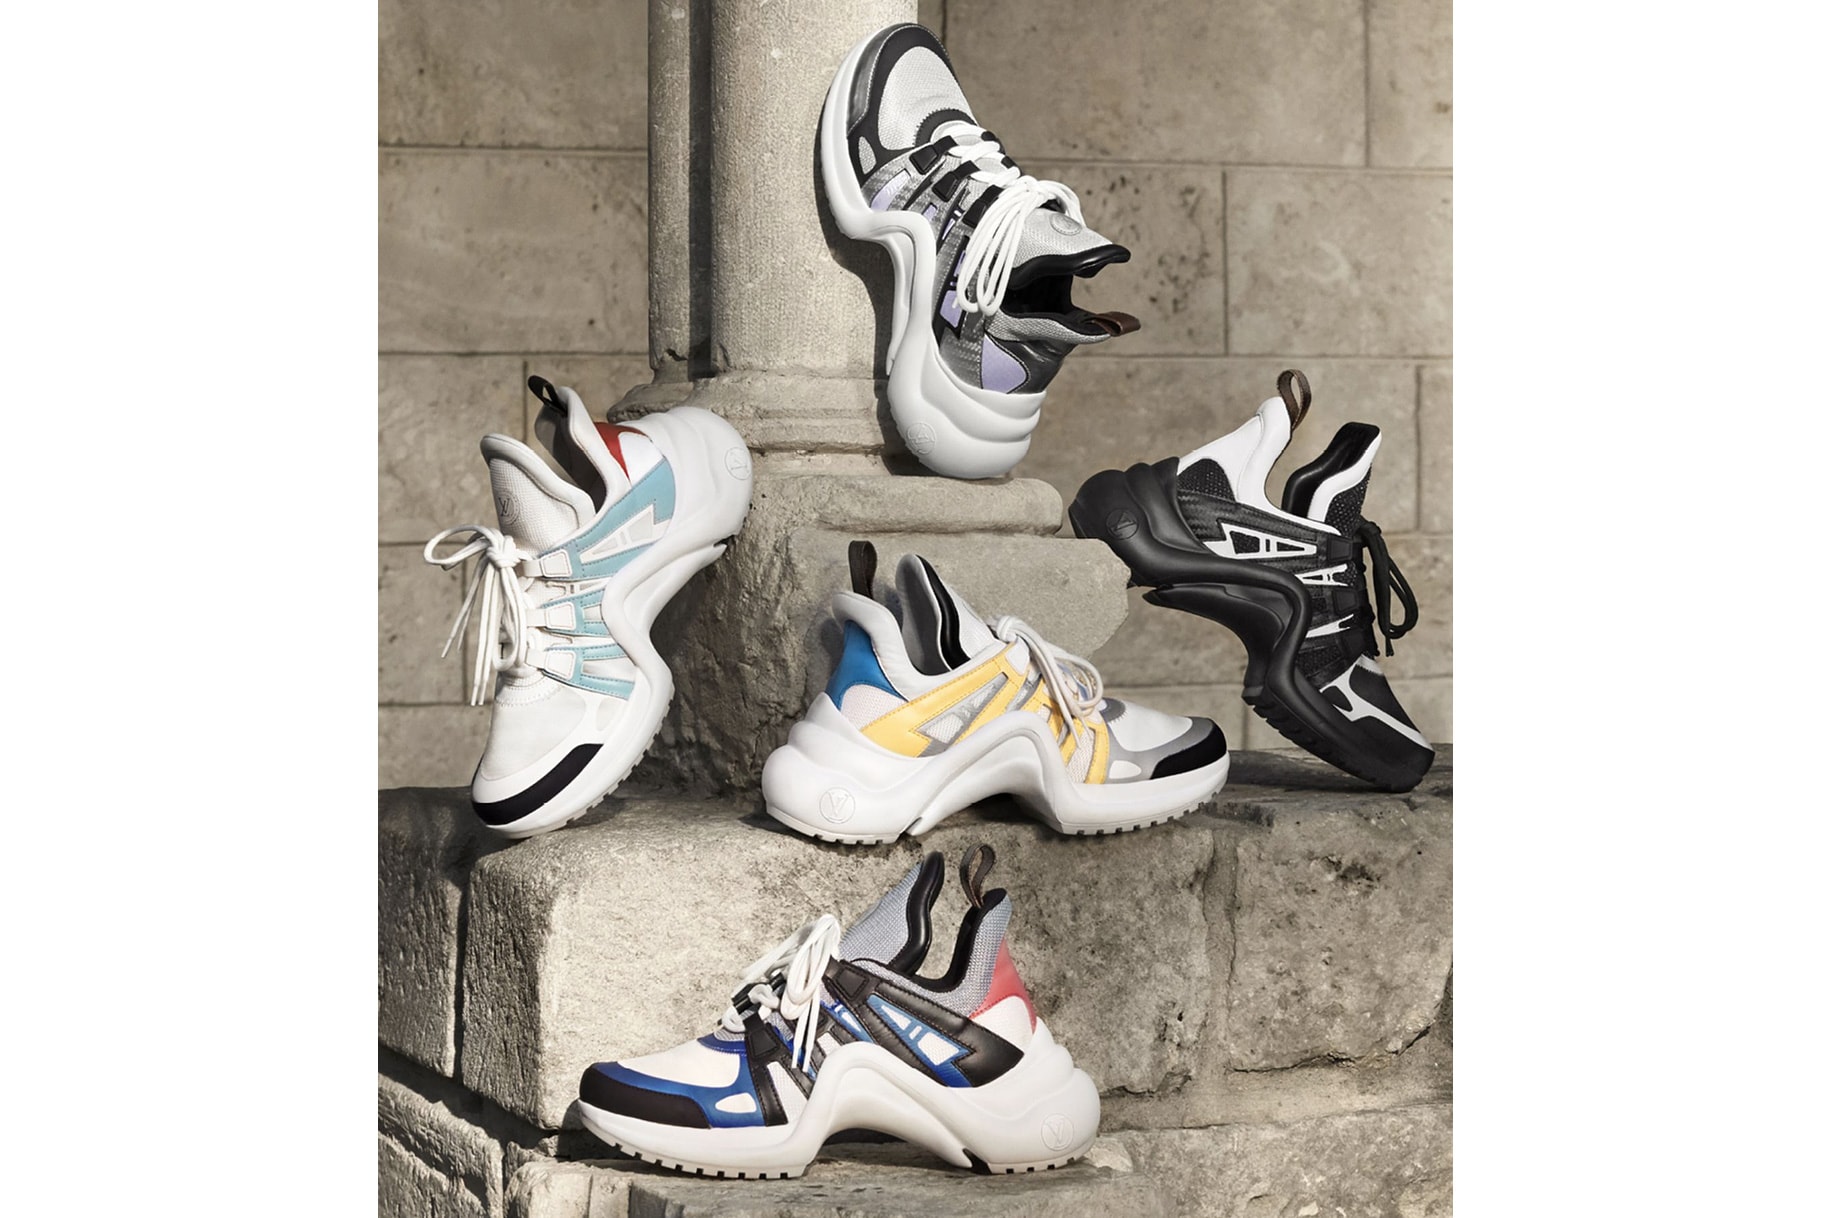 Louis Vuitton Archlight Chunky Sneakers It 40 | 10